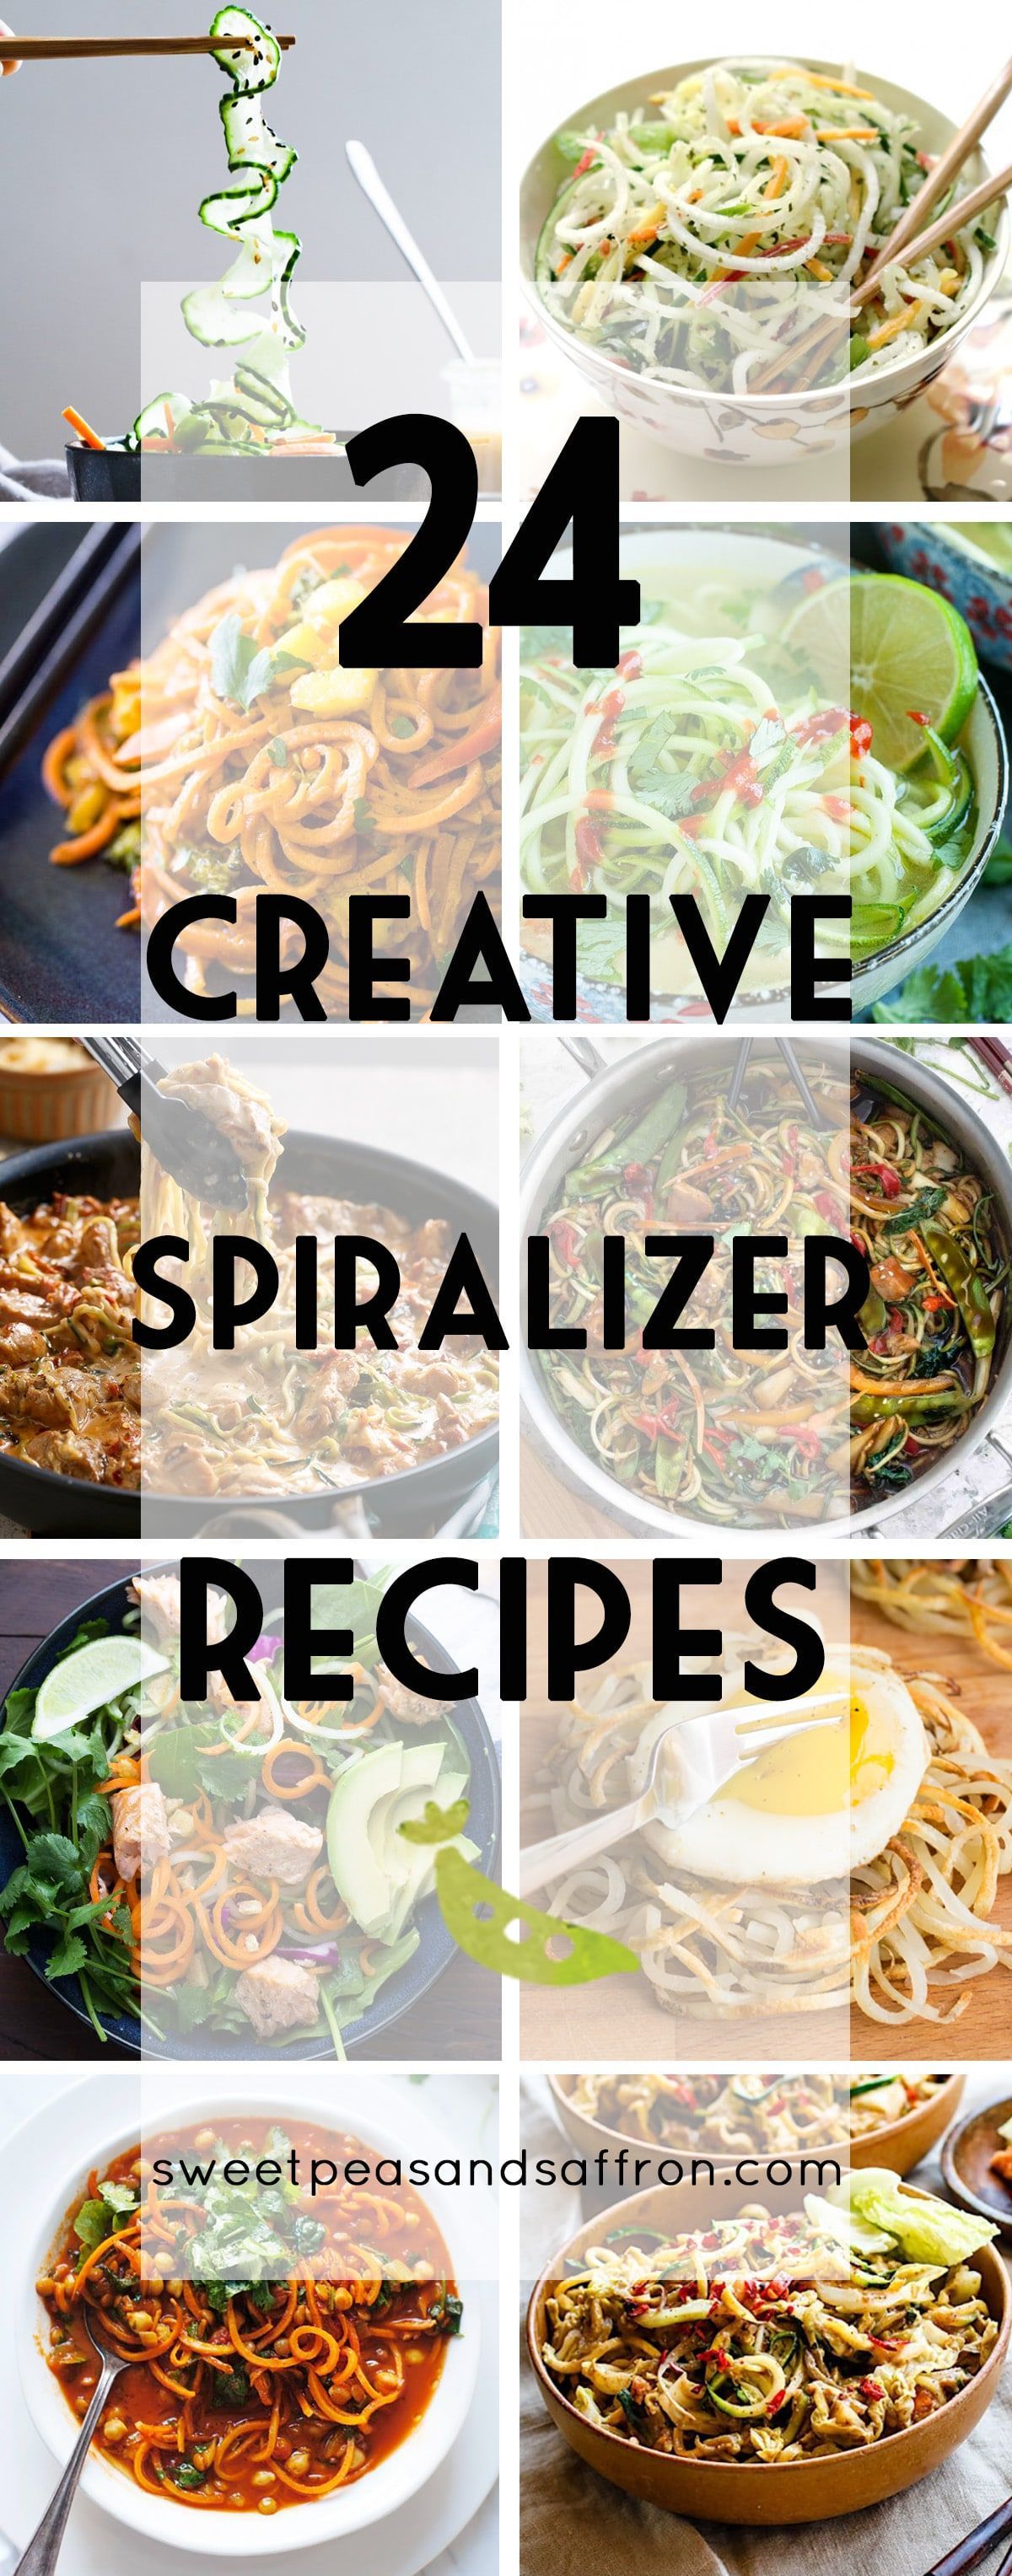 A round-up of spiralizer recipes that will break you out of your rut! Soups, salads, dinner recipes and more!